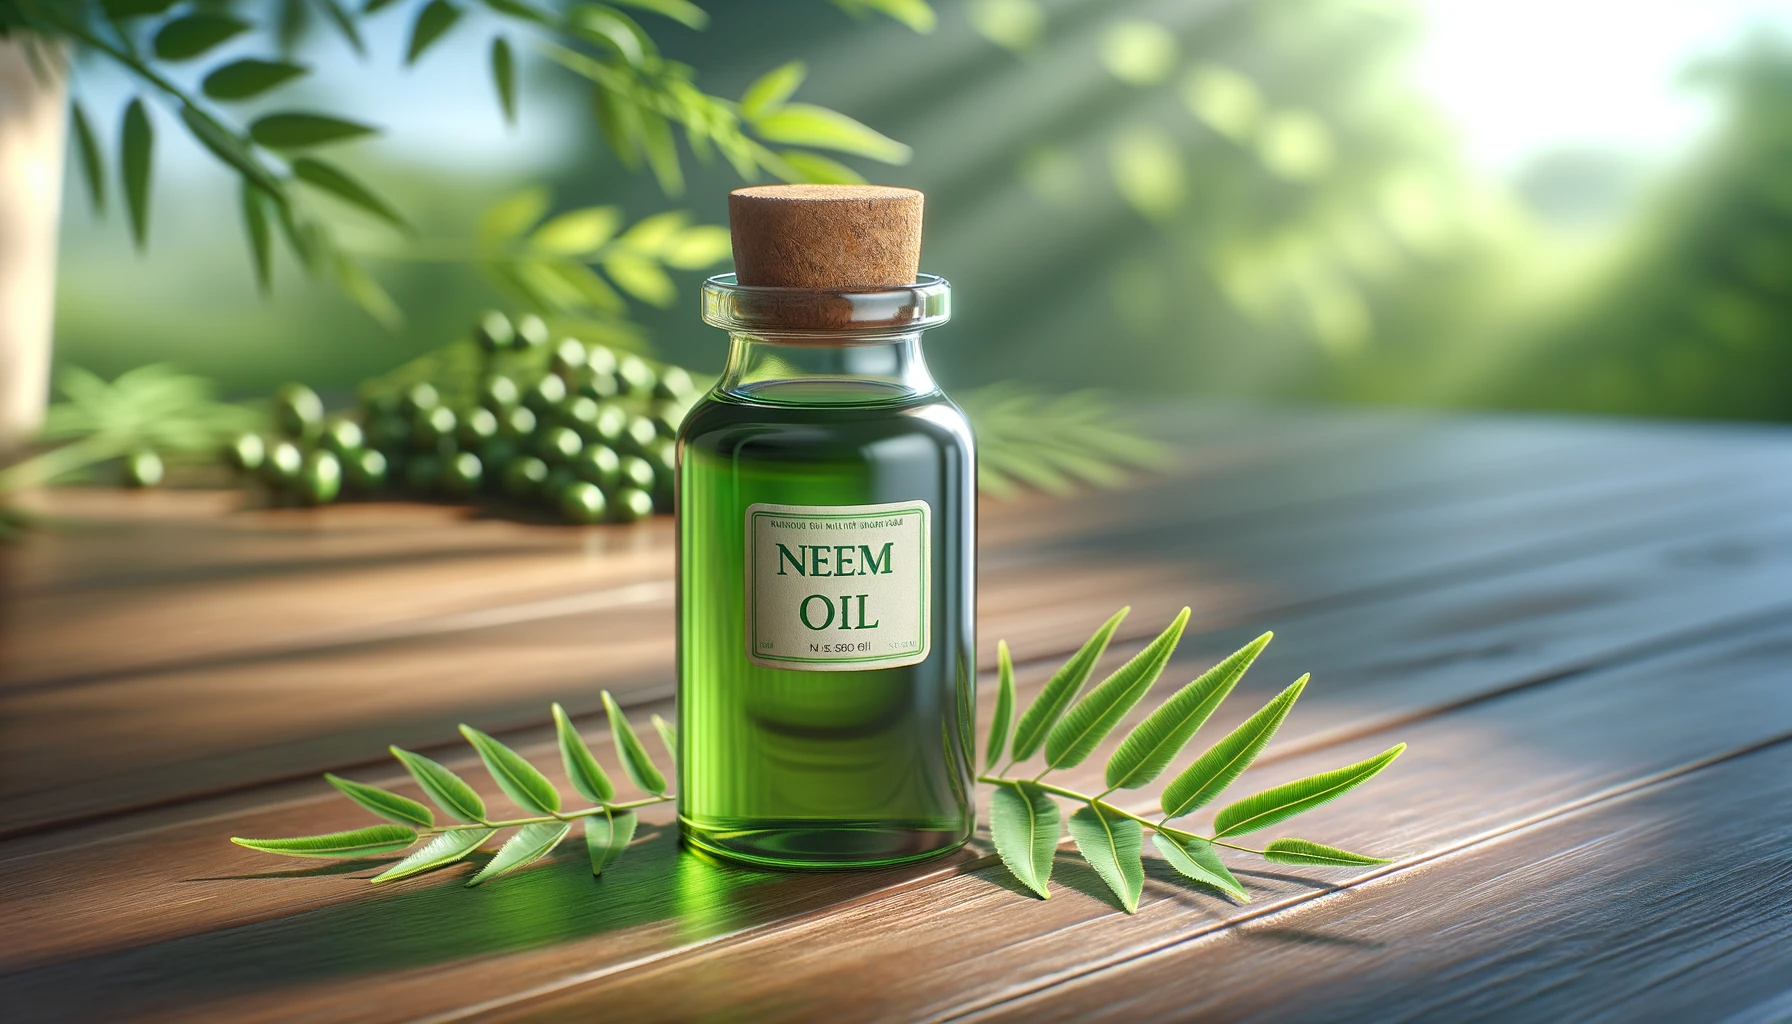 Neem Oil as an Insecticide